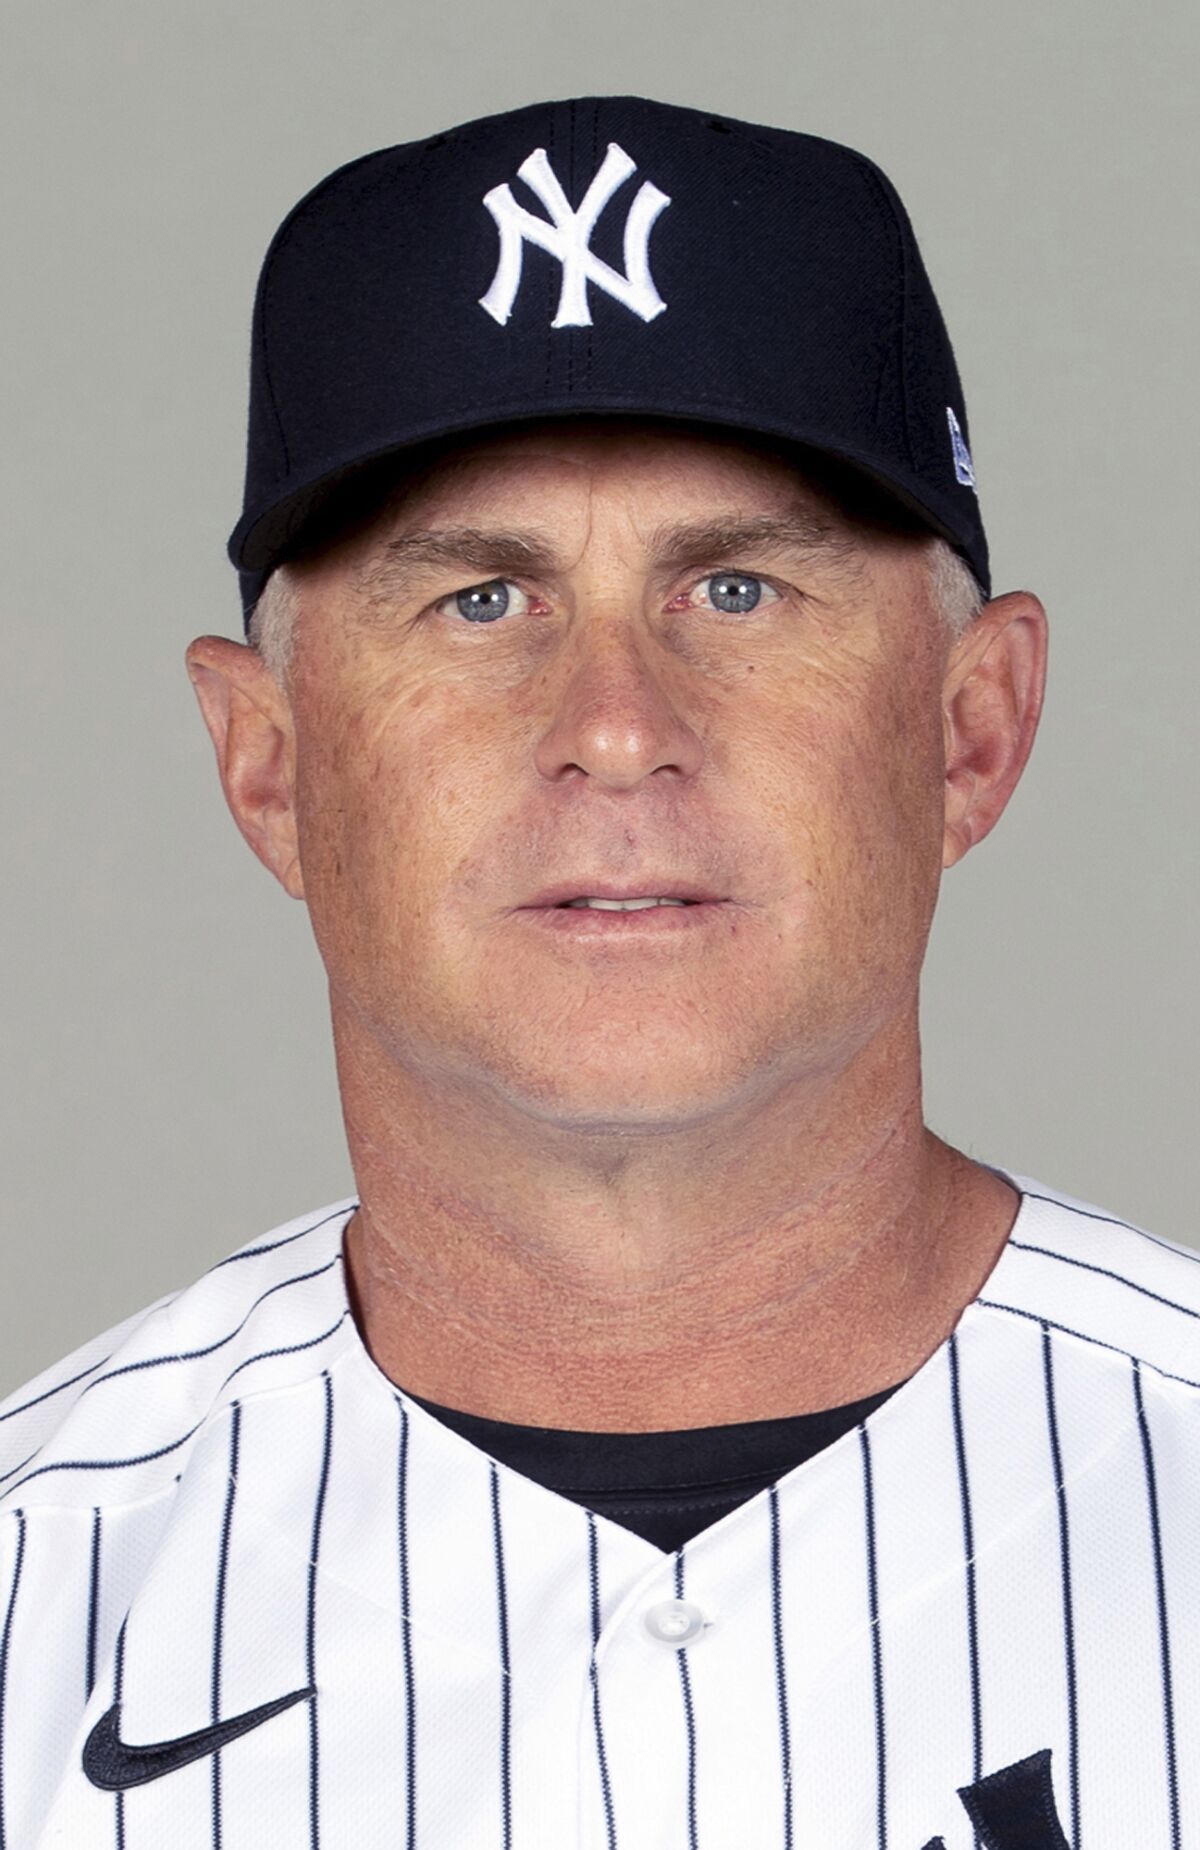 This is a 2021 photo of Phil Nevin of the New York Yankees baseball team. The Yankees announced Tuesday, May 11, 2021, that third base coach Phil Nevin, who is fully vaccinated, has tested positive for the coronavirus. Nevin is currently under quarantine protocol in Tampa. Under Major League Baseball’s guidance and advice, and with its assistance, additional testing and contact tracing are ongoing. (Mike Carlson/MLB Photos via AP, File)